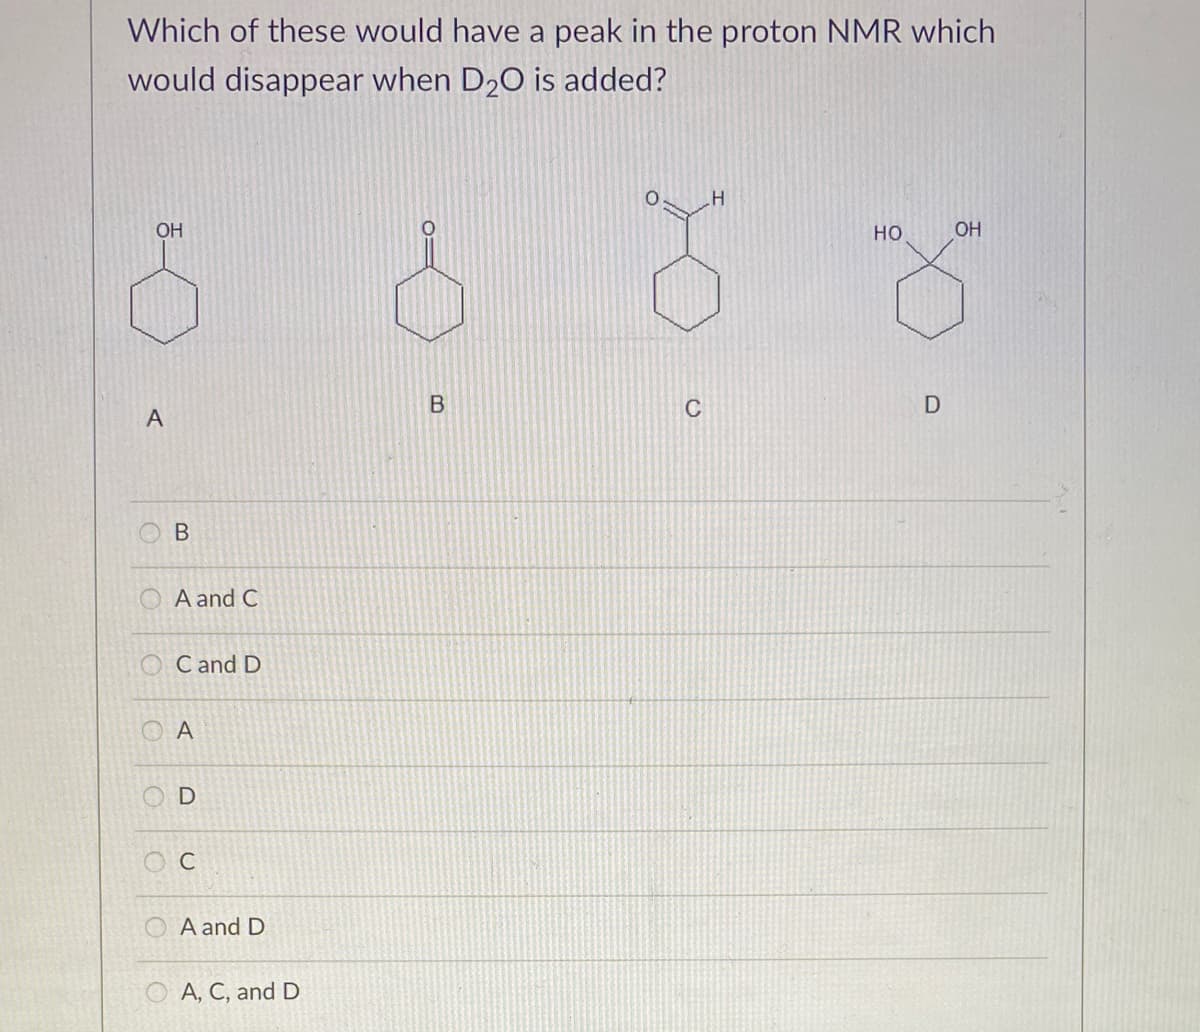 Which of these would have a peak in the proton NMR which
would disappear when D20 is added?
OH
но
OH
C
D
A and C
O Cand D
O A
O A and D
O A, C, and D
